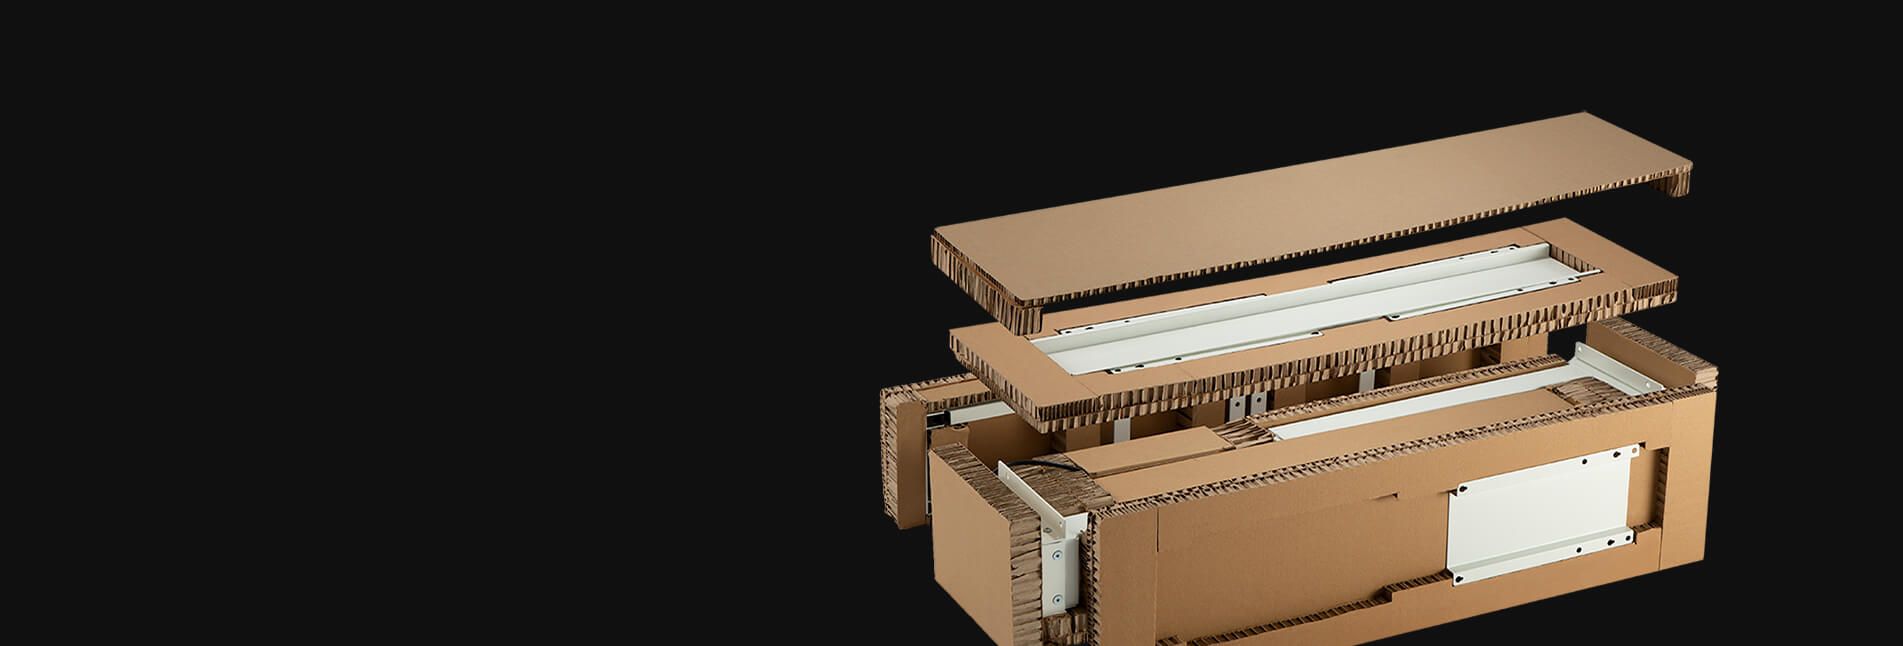 Package Structure Design by Treefruit